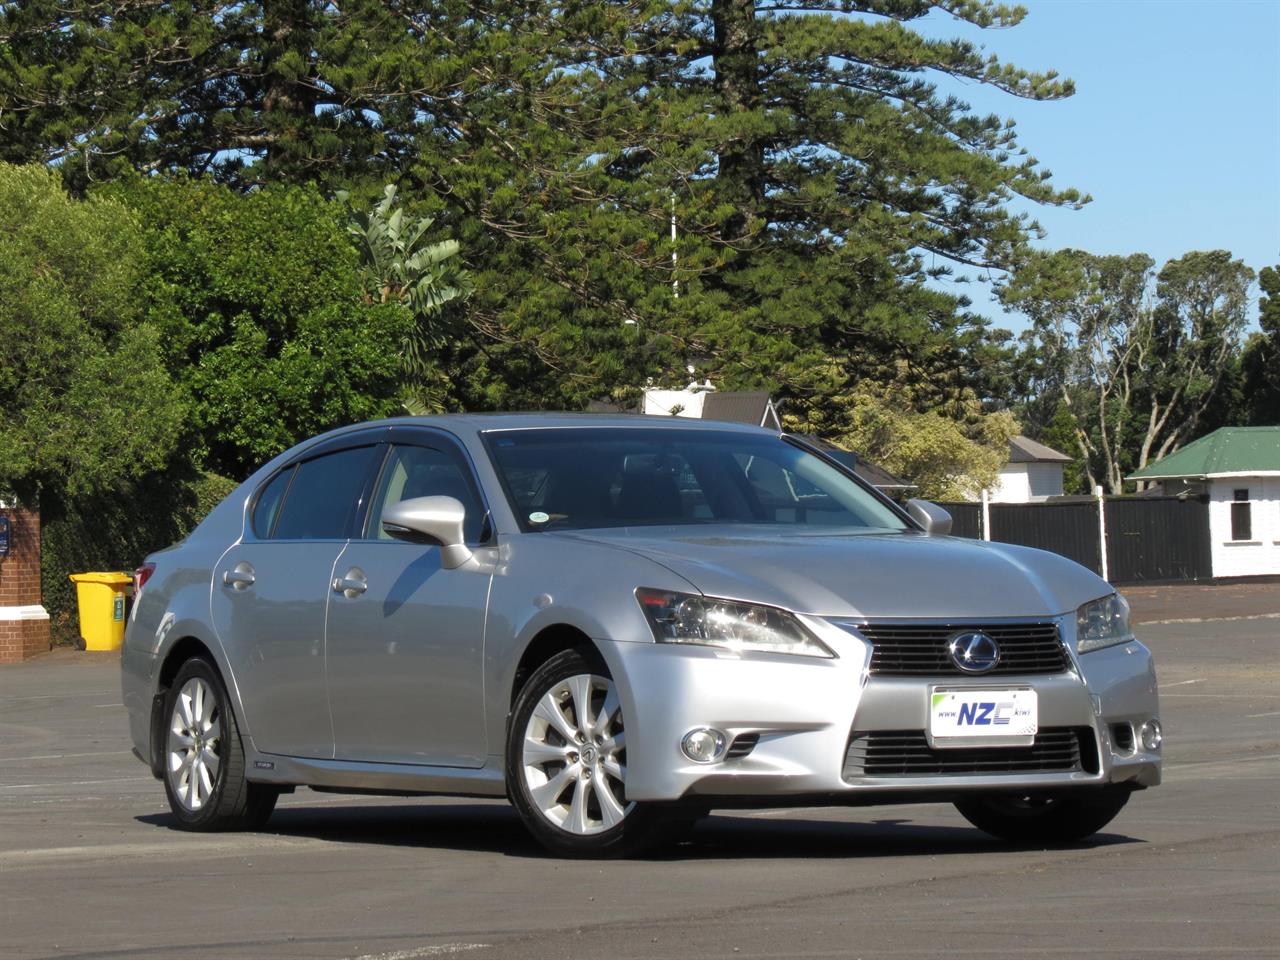 NZC 2012 Lexus GS 450h just arrived to Auckland